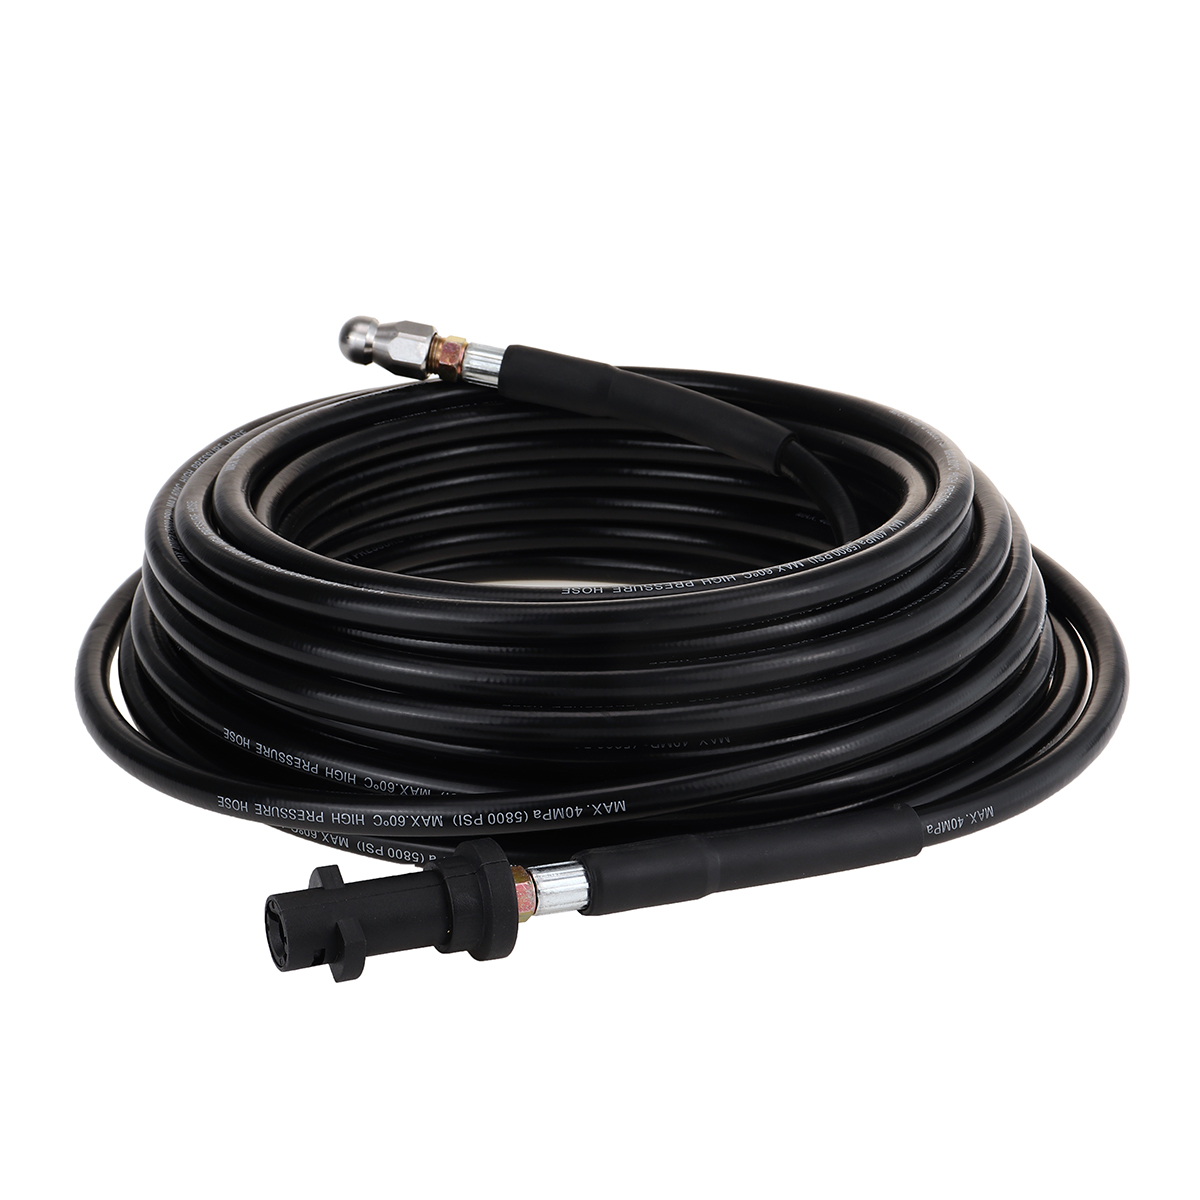 5-20M-Sewer-Jet-Pressure-Washer-Hose-with-Button-Nose-Sewer-Jetter-Nozzle-1720900-4